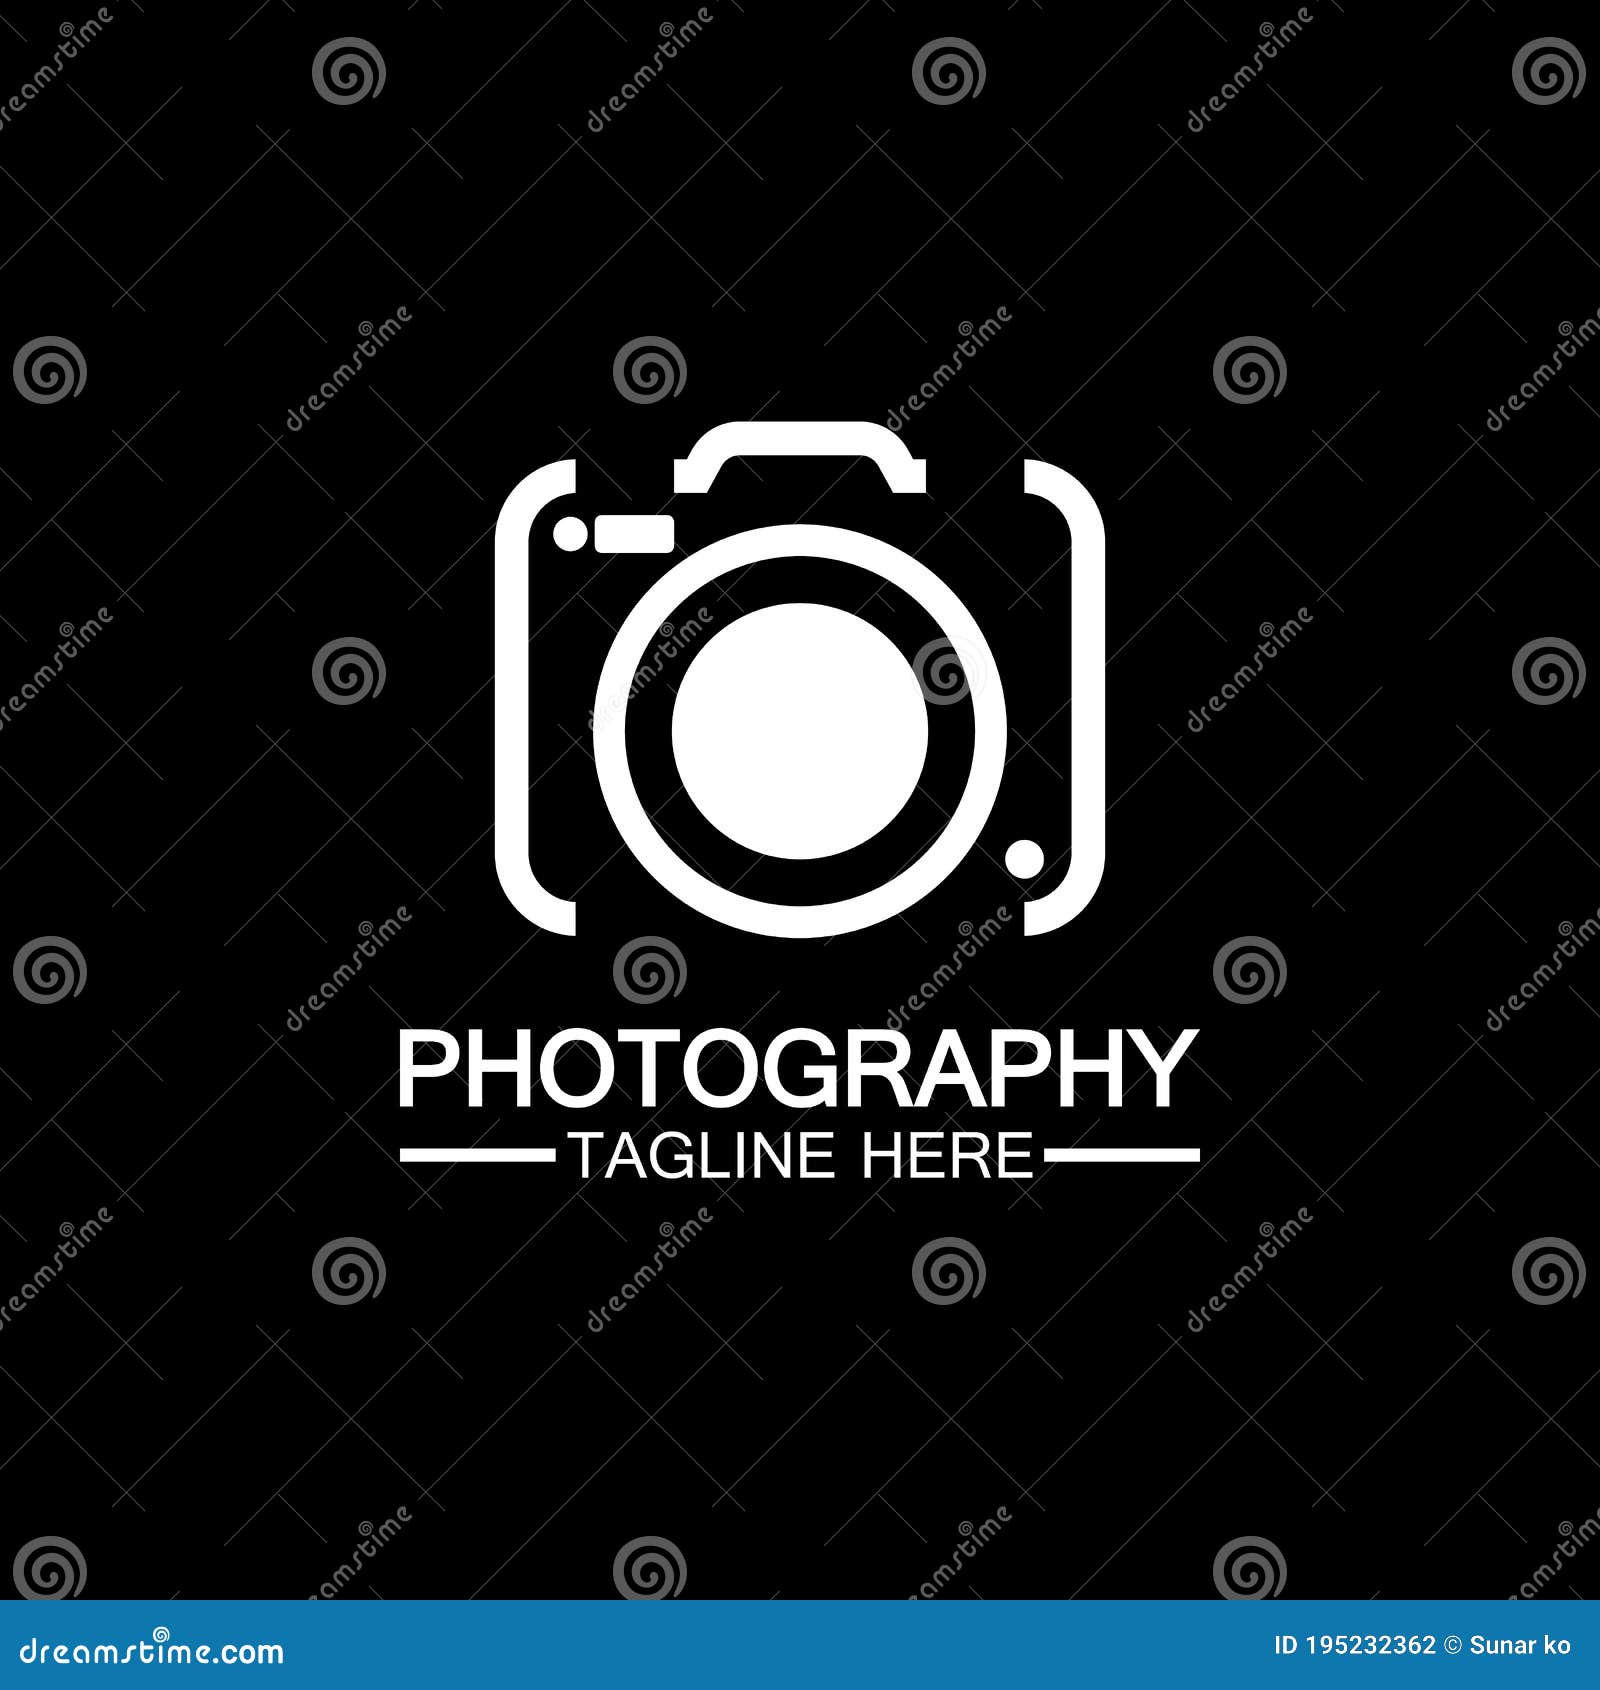 Photography Camera Logo Icon Vector Design Template Isolated on Black  Background Stock Vector - Illustration of concept, film: 195232362